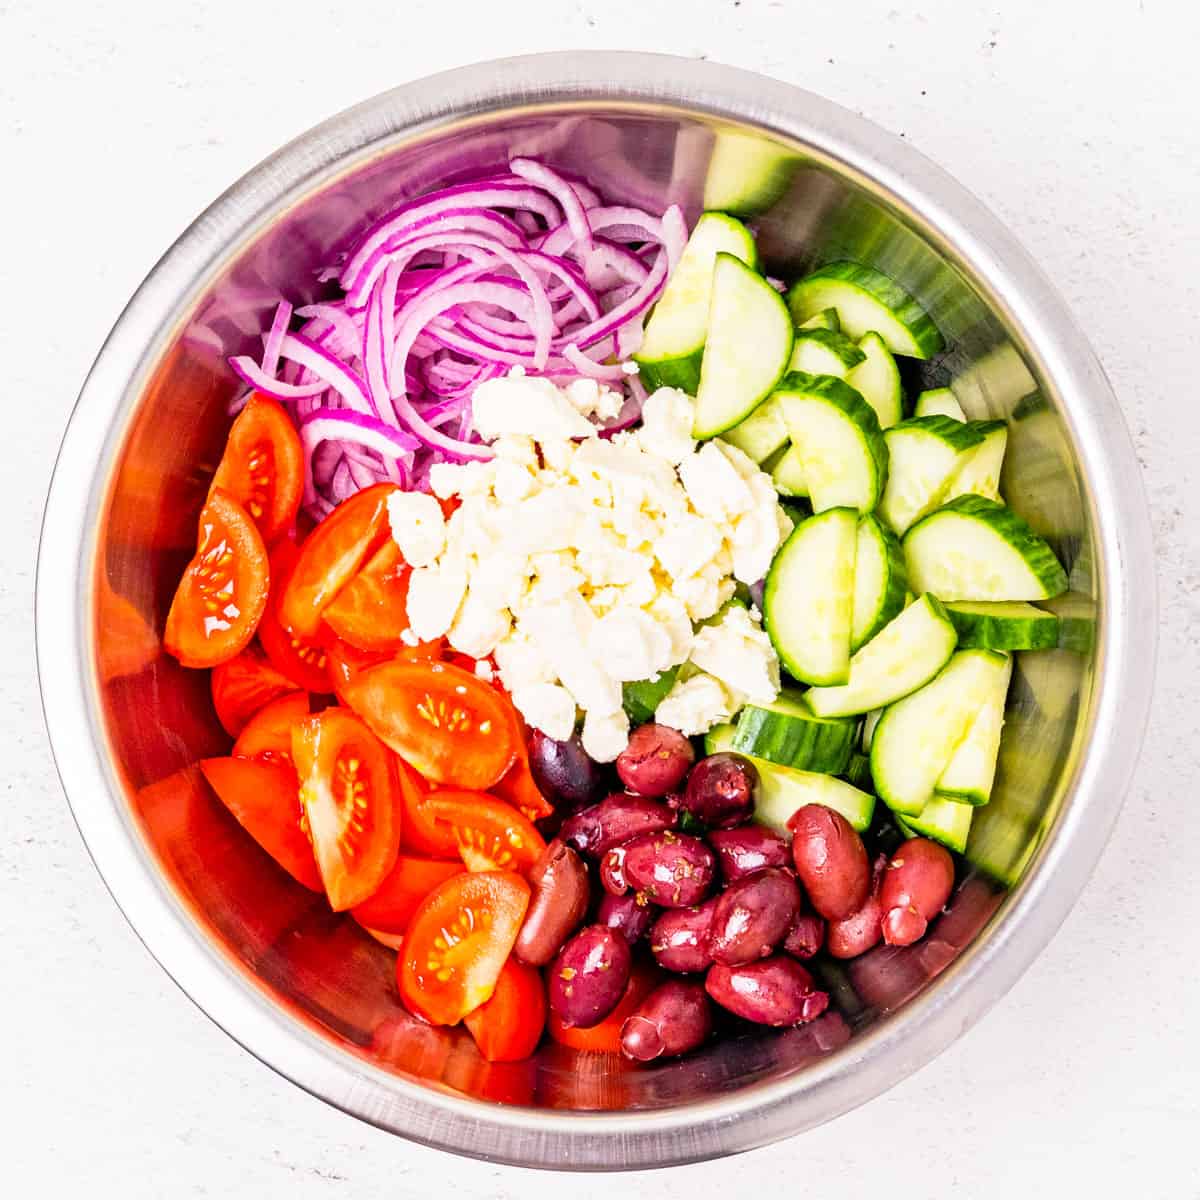 Greek salad ingredients in a mixing bowl before adding dressing and stirring to combine.